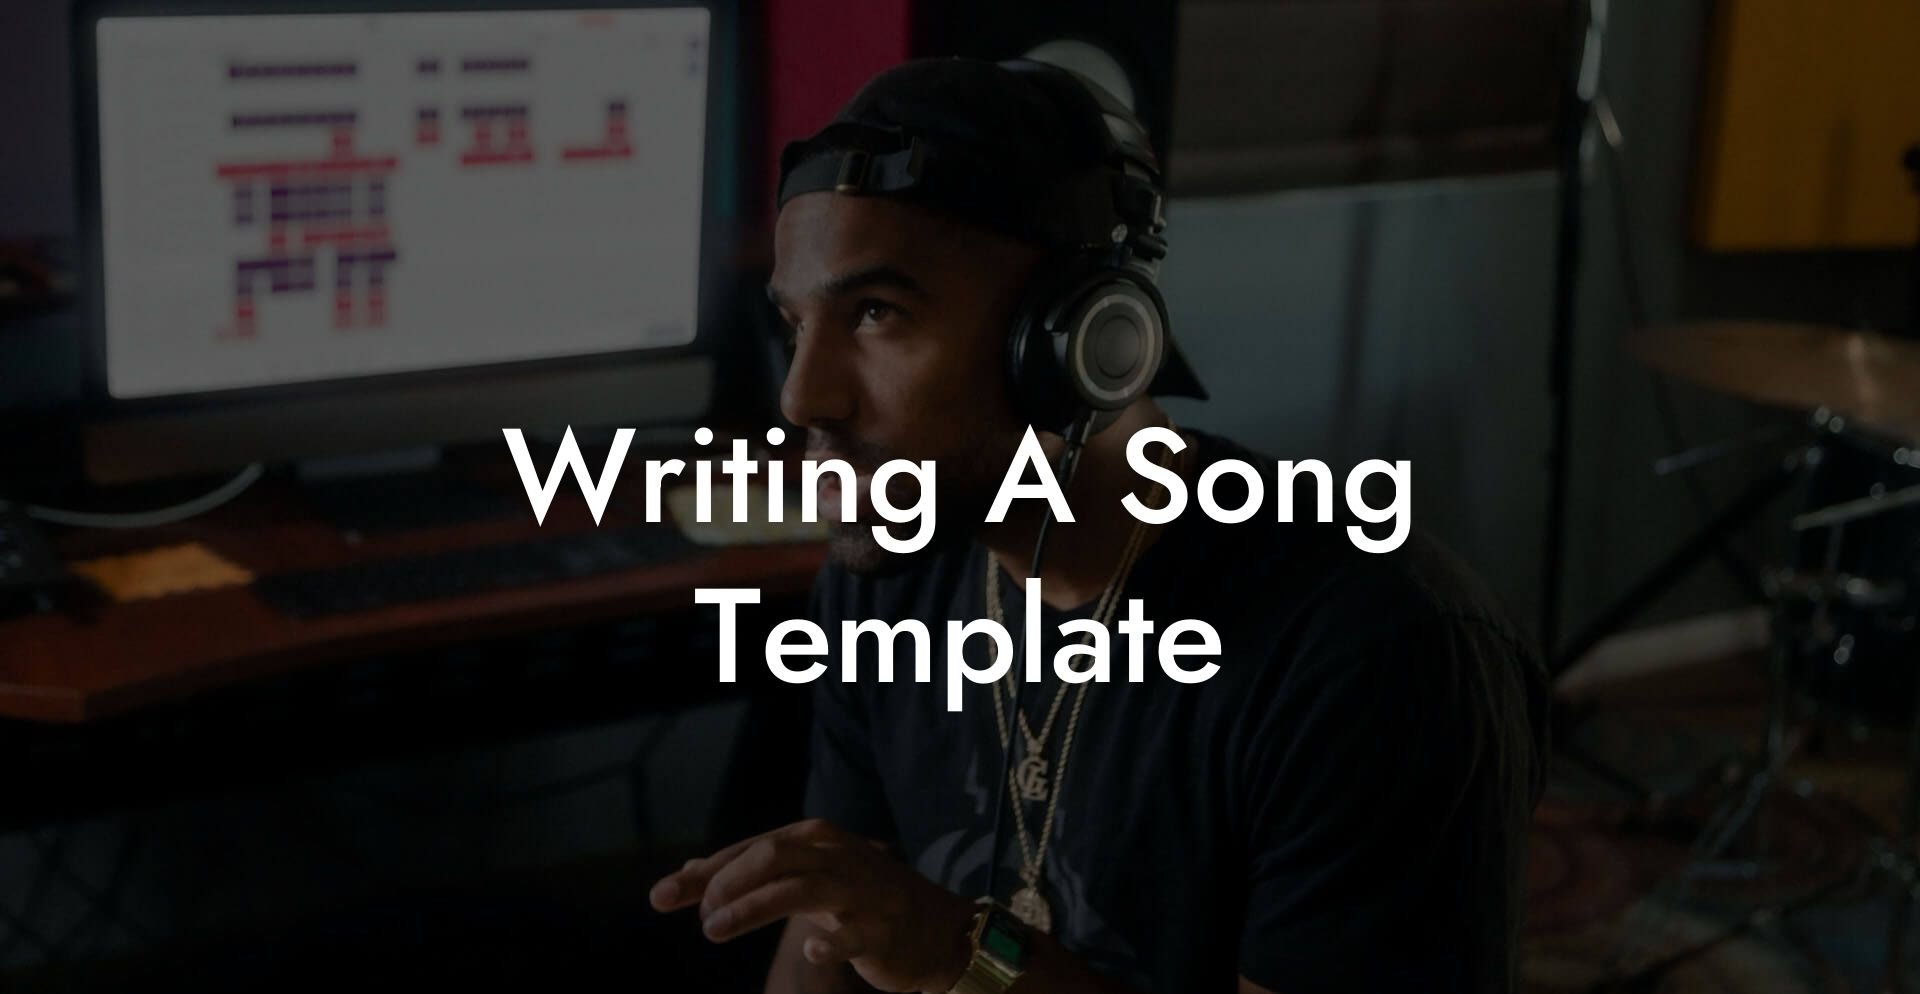 writing a song template lyric assistant